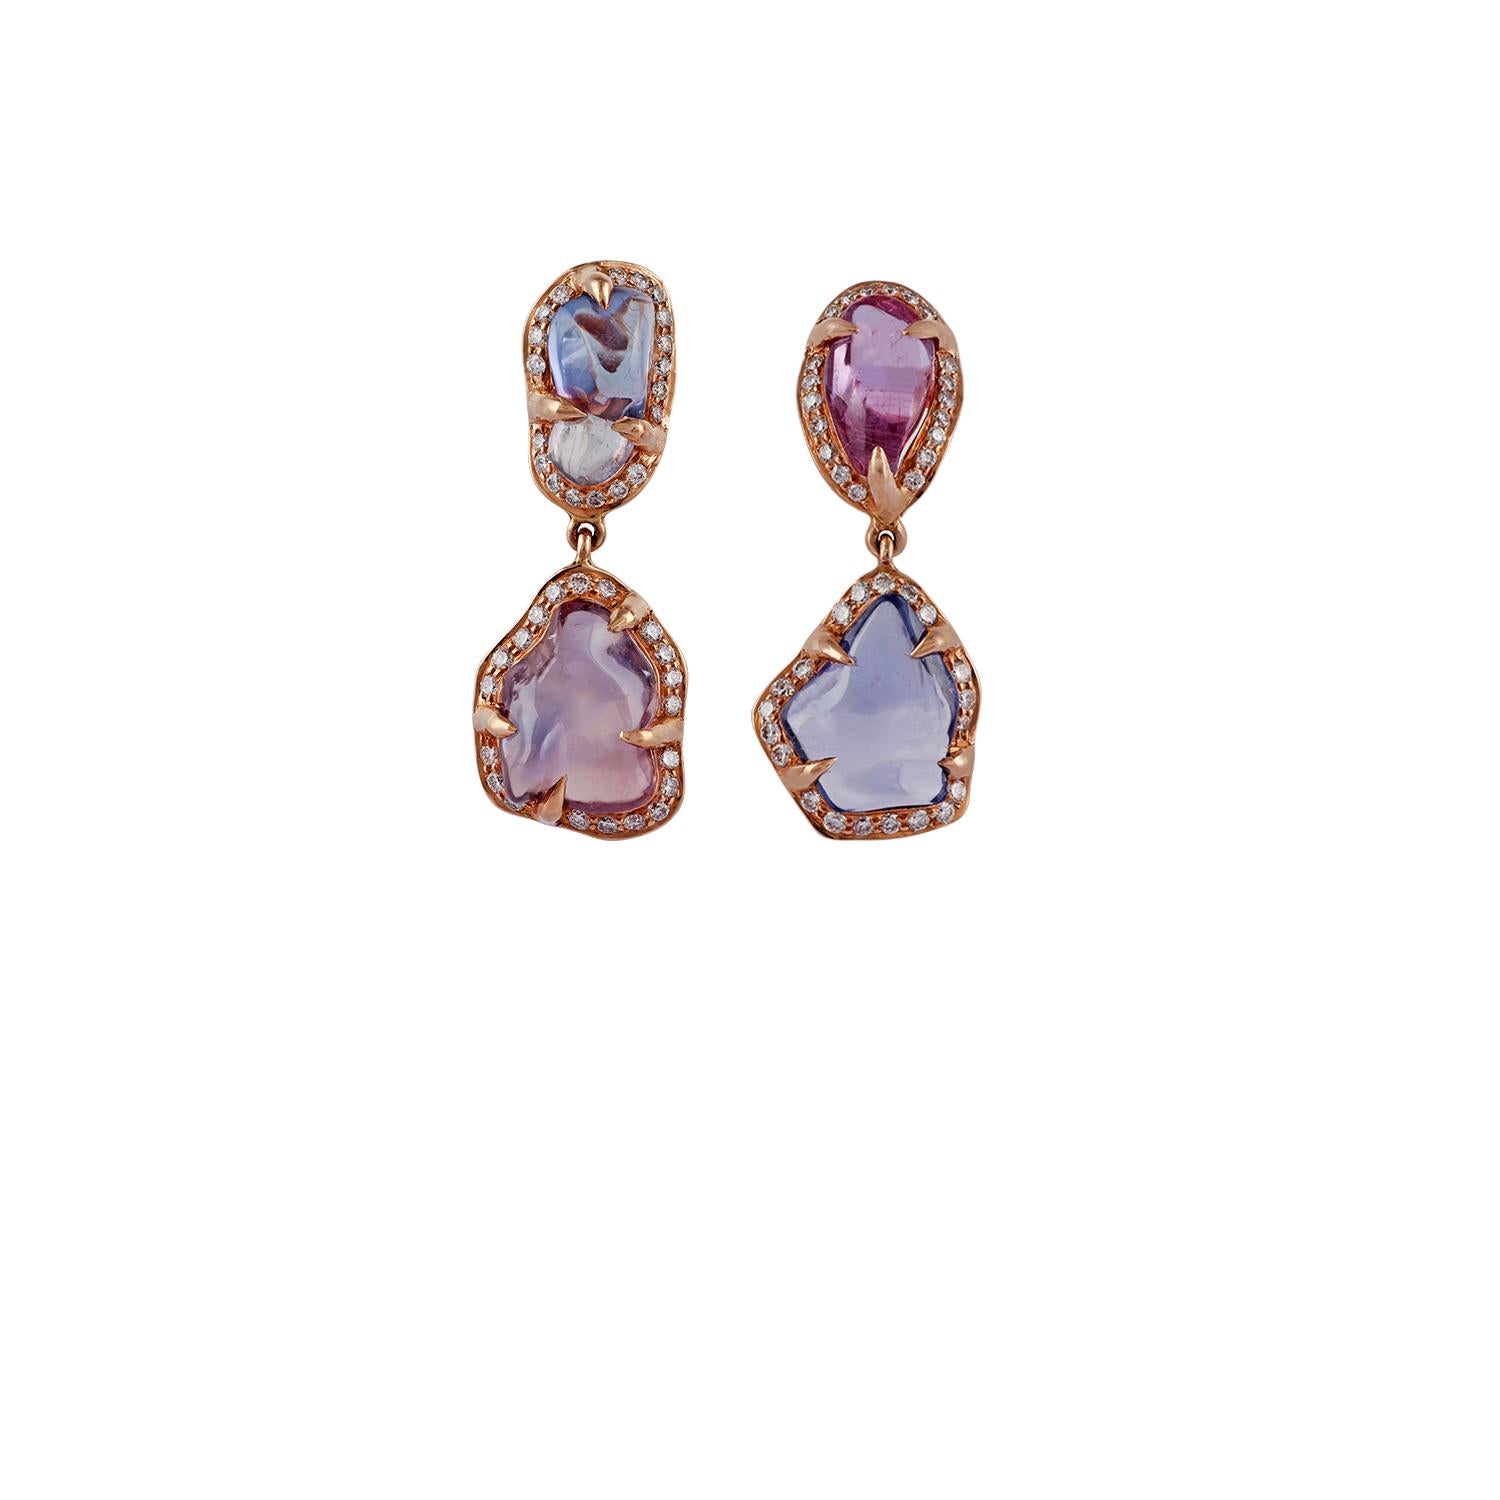 These are a unique pair of earrings with tumbled shaped multi sapphire & diamonds features 4 pieces of multi sapphire tumble weight 8.96 carats & 80 pieces of round shaped brilliant cut diamonds weight 0.51 carat, these entire earrings are studded